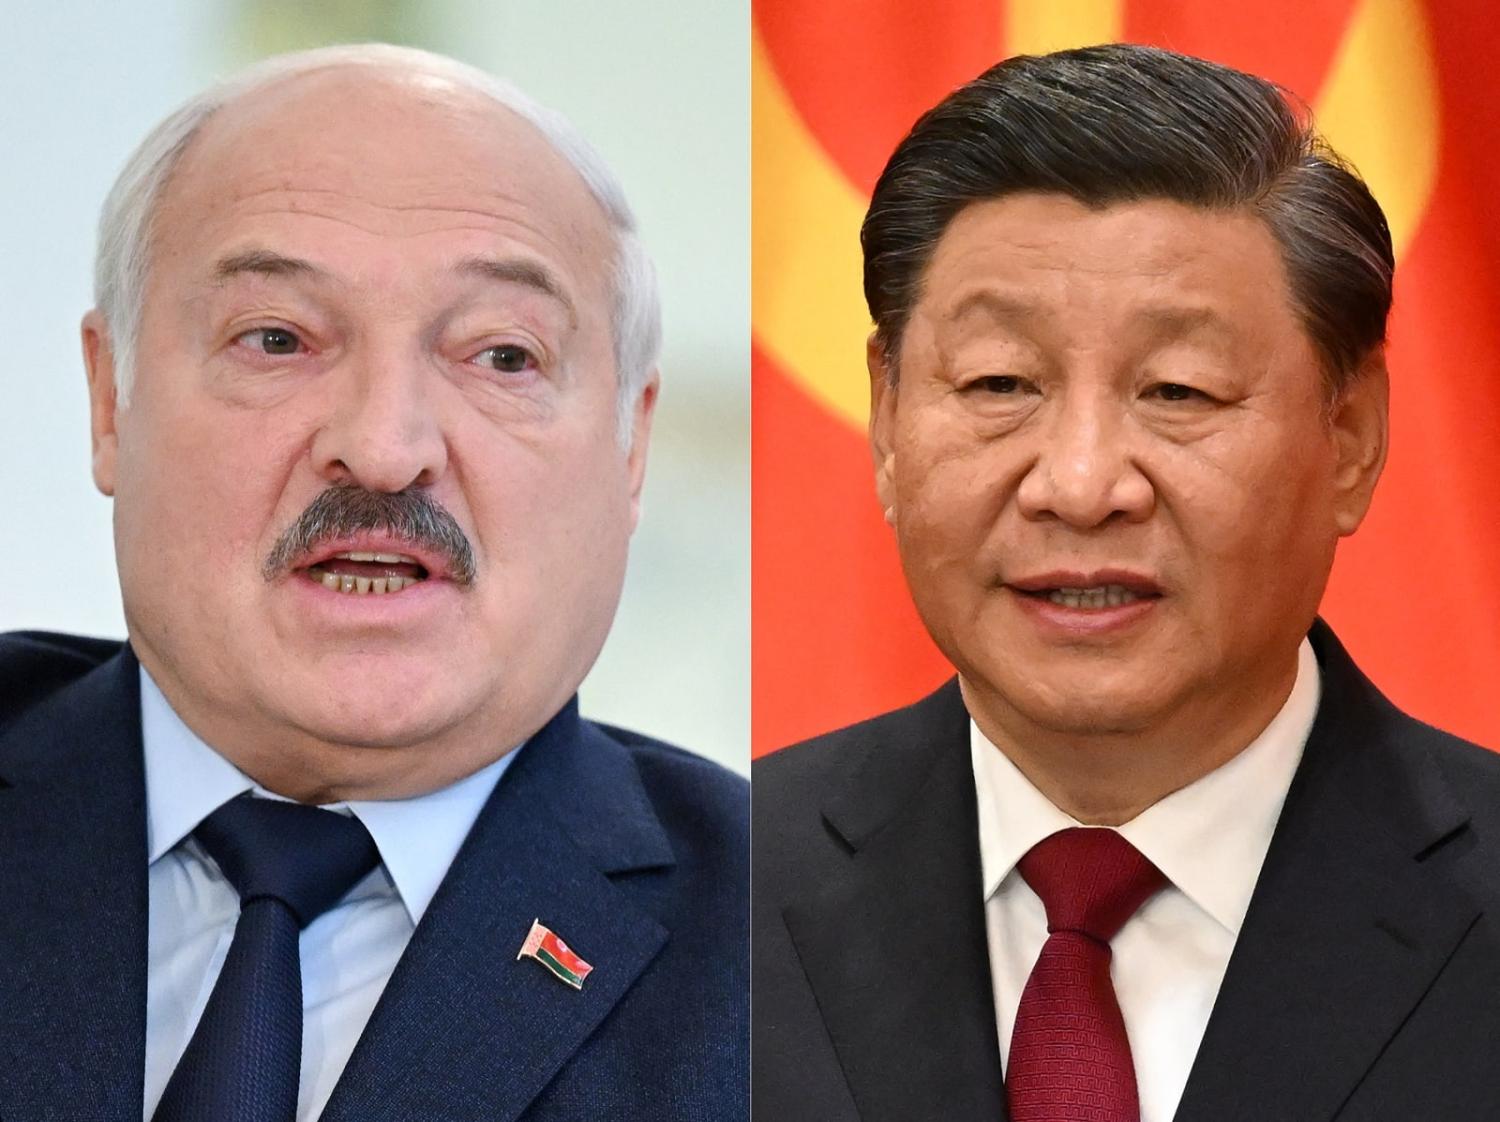 Belarusian President Alexander Lukashenko (L) and Chinese President Xi Jinping recently signed a joint declaration to strengthen cooperation on defence, law enforcement and security (Natalia Kolesnikova/Noel Celis/AFP via Getty Images)